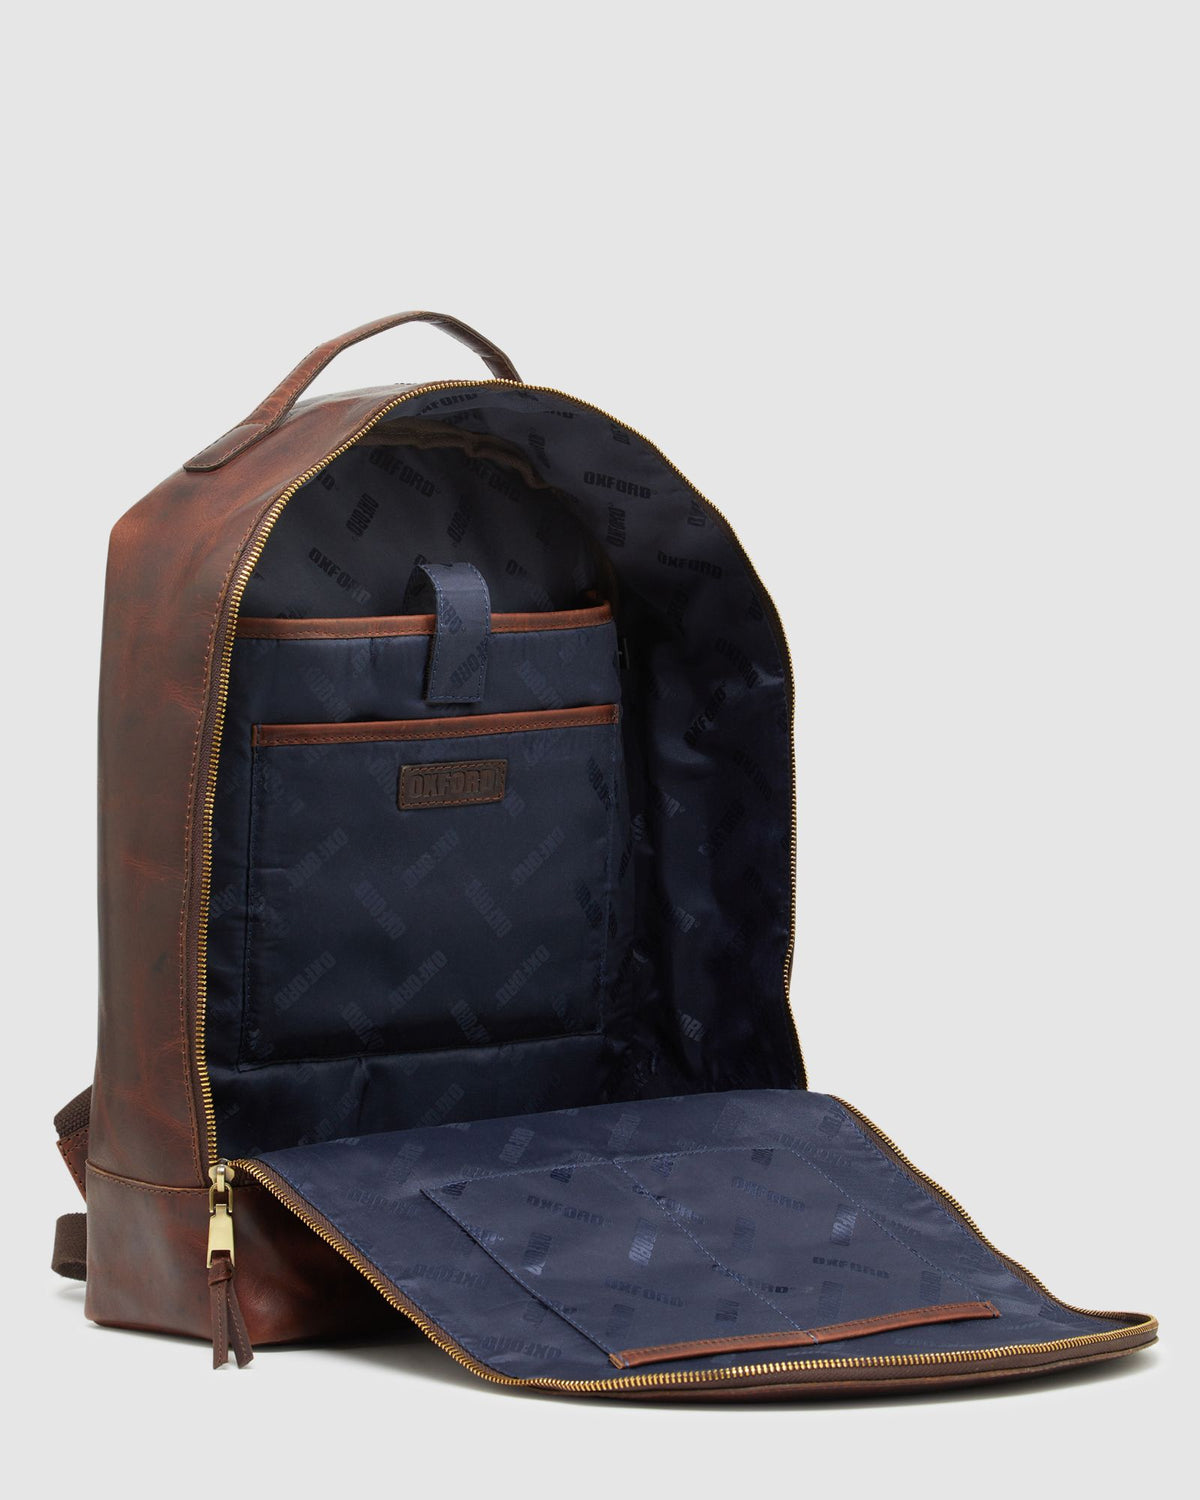 GRIFFIN BACKPACK MENS ACCESSORIES